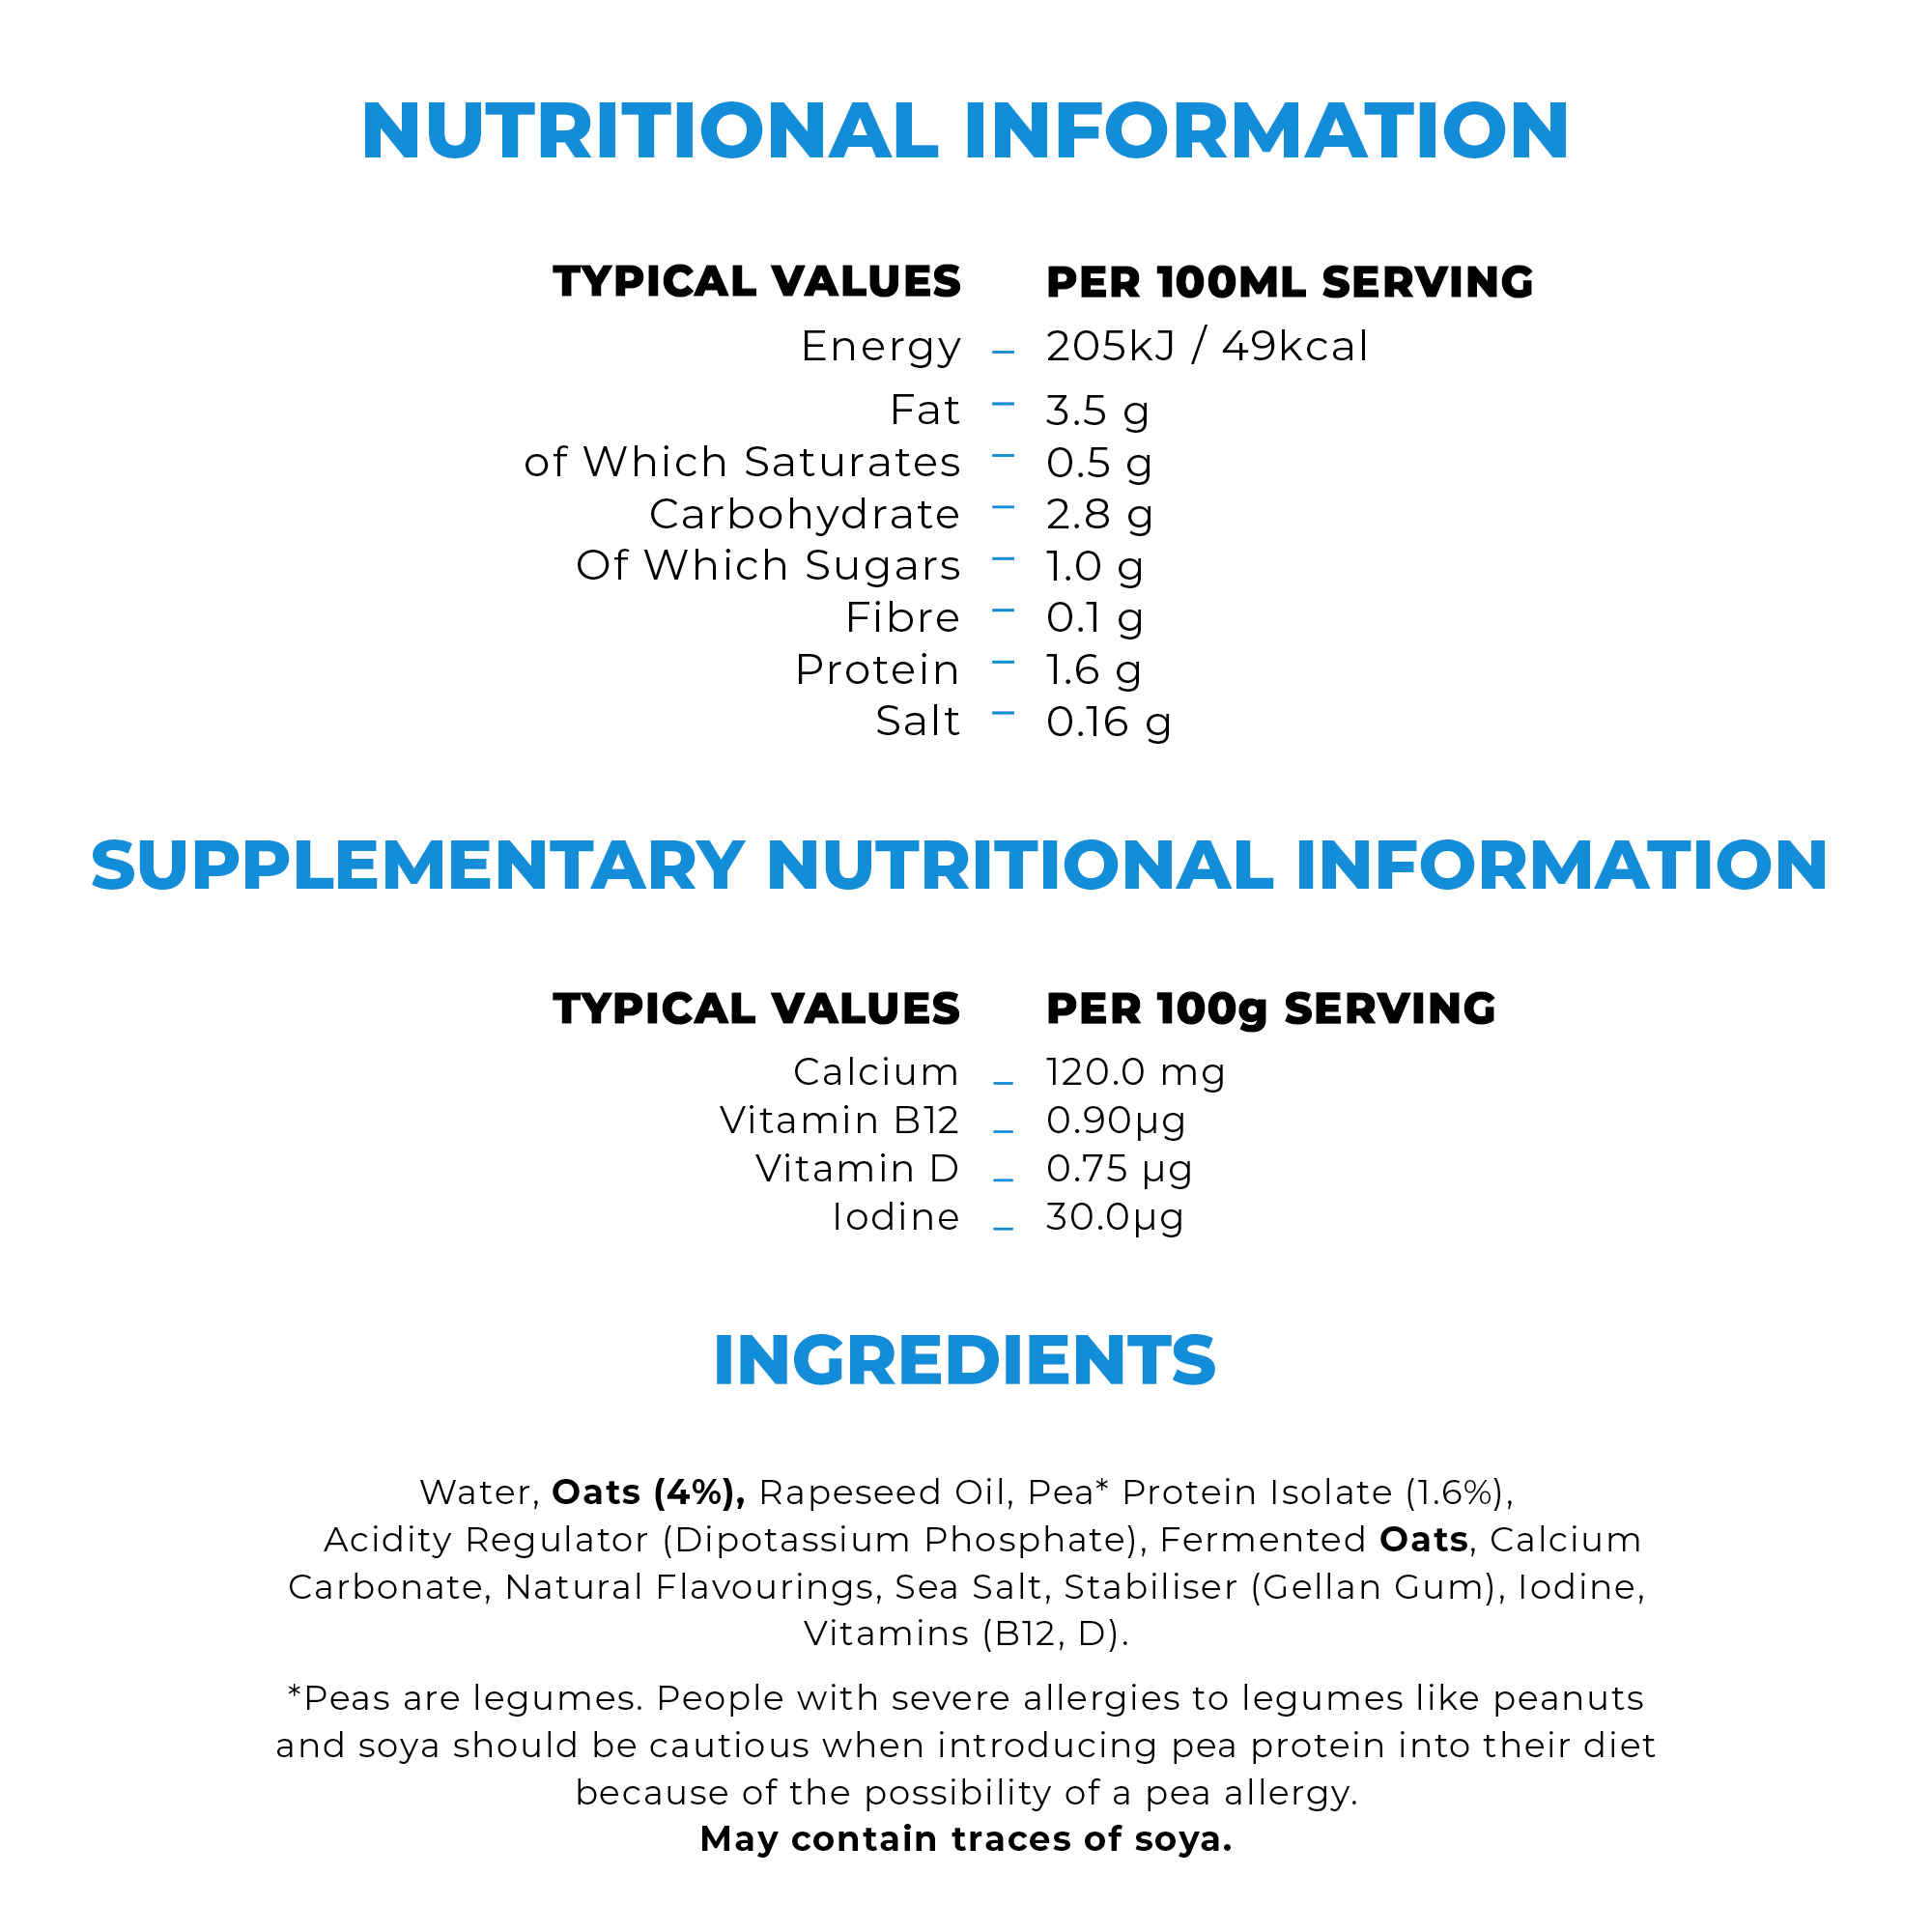 NUTRITIONAL INFORMATION TYPICAL VALUES Energy 3.5g, Fat 0.5 g, of Which Saturates 2.8 g, Carbohydrate 1.0 g, Of Which Sugars 0.1 g, Fibre 1.6 g, Protein Salt - 0.16 g. PER 100ML SERVING 205kJ / 49kcal SUPPLEMENTARY NUTRITIONAL INFORMATION TYPICAL VALUES Calcium Vitamin B12, Vitamin D, lodine, PER 100g SERVING 120.0 mg
                                  , 0.90μg, 0.75 μg, 30.0µg, INGREDIENTS Water, Oats (4%), Rapeseed Oil, Pea* Protein Isolate (1.6%), Acidity Regulator (Dipotassium Phosphate), Fermented Oats, Calcium, Carbonate, Natural Flavourings, Sea Salt, Stabiliser (Gellan Gum), lodine,Vitamins (B12, D).